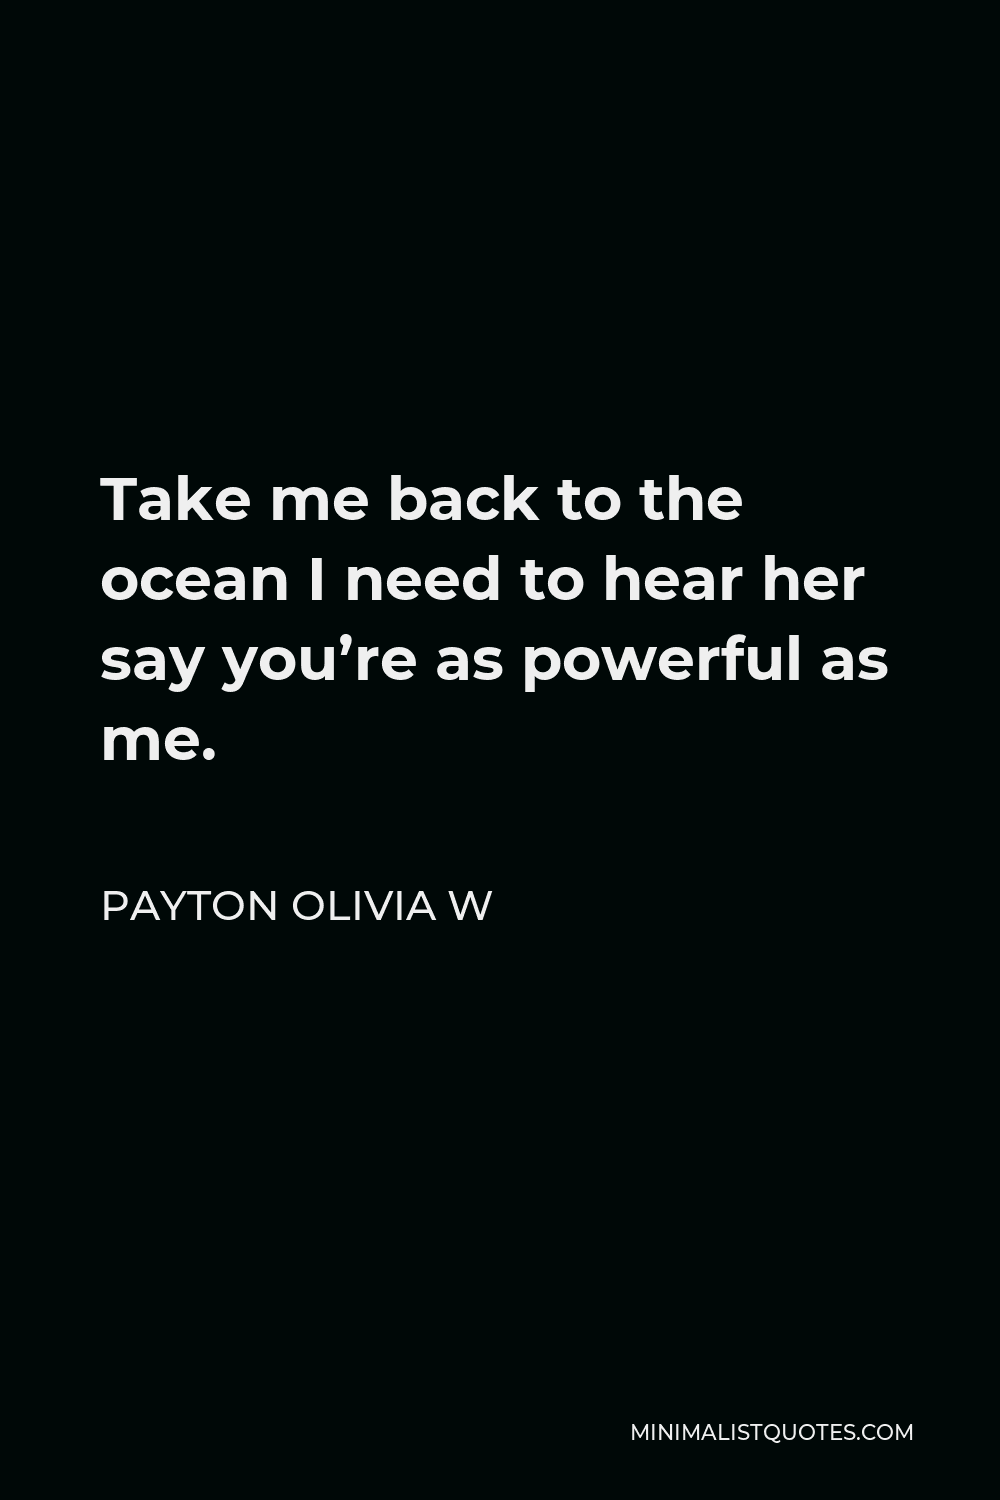 Payton Olivia W Quote - Take me back to the ocean I need to hear her say you’re as powerful as me.